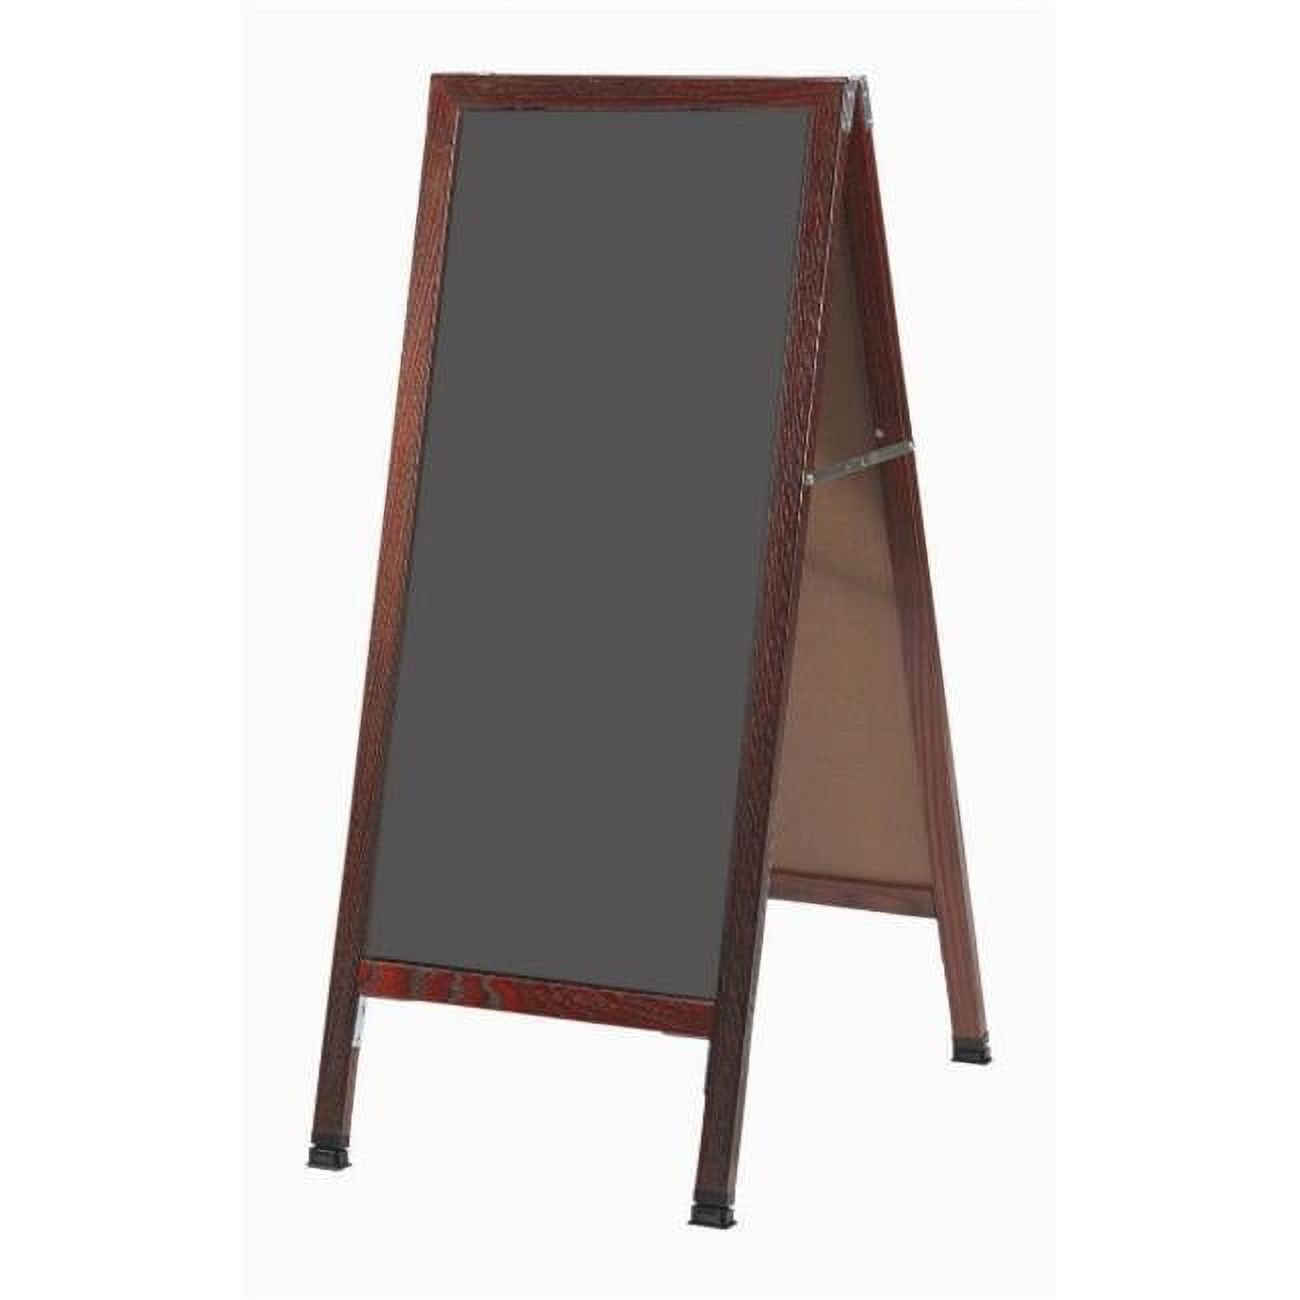 Aarco Products  Inc. MA-35SS A-Frame Sidewalk Board Features a Slate Colored Porcelain Chalkboard and Solid Red Oak Frame with Cherry Stain. Size 42 in.Hx18 in.W - image 1 of 1